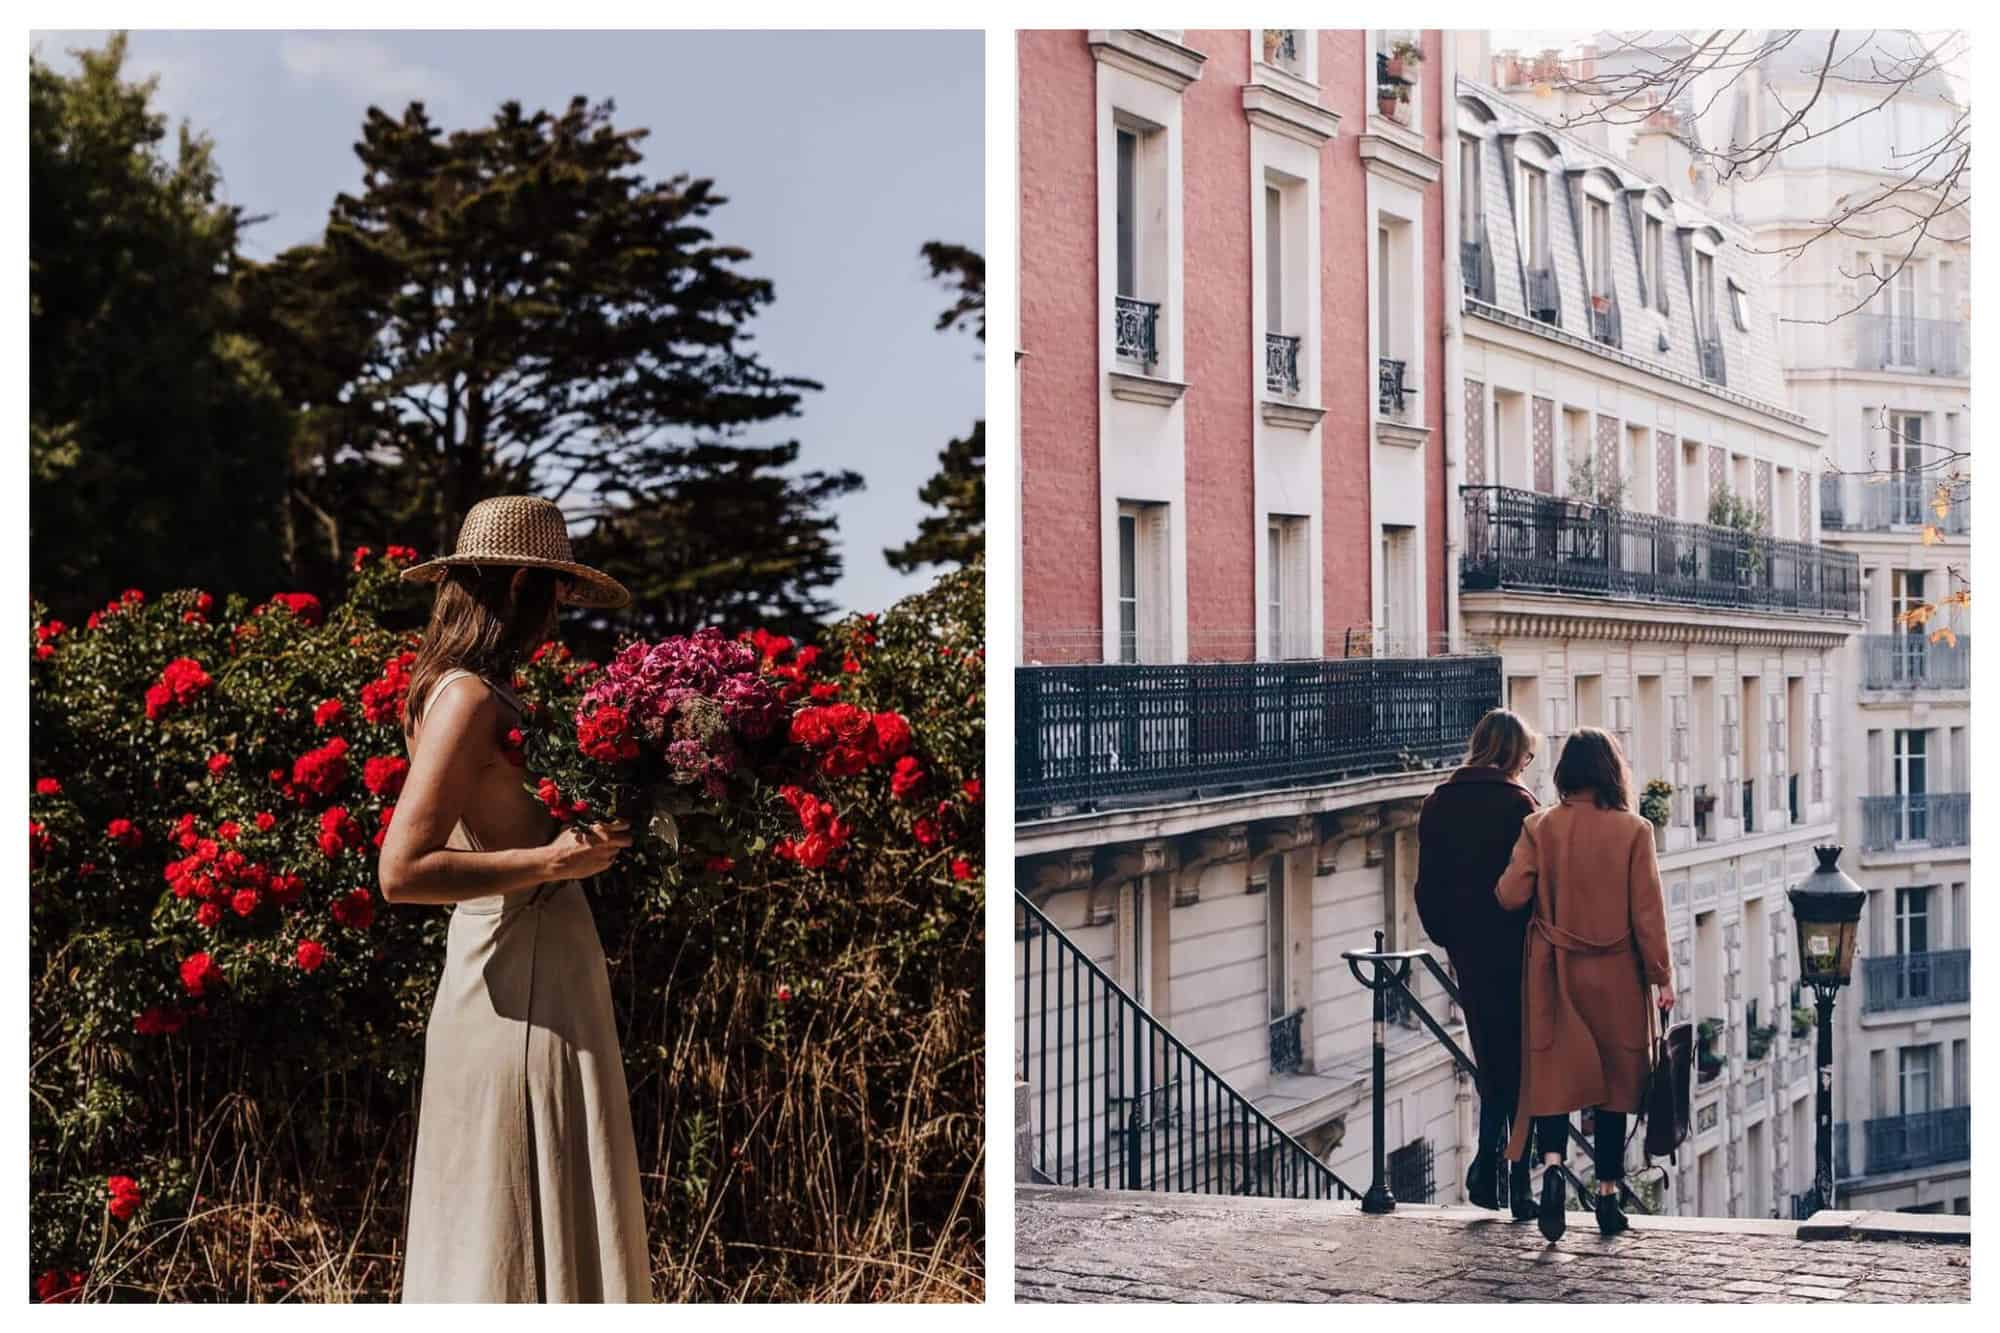 Left: a woman standing in a field of red flowers, wearing a maxi dress and a sun hat, Right: two women walking down steps in Paris, wearing trench coats